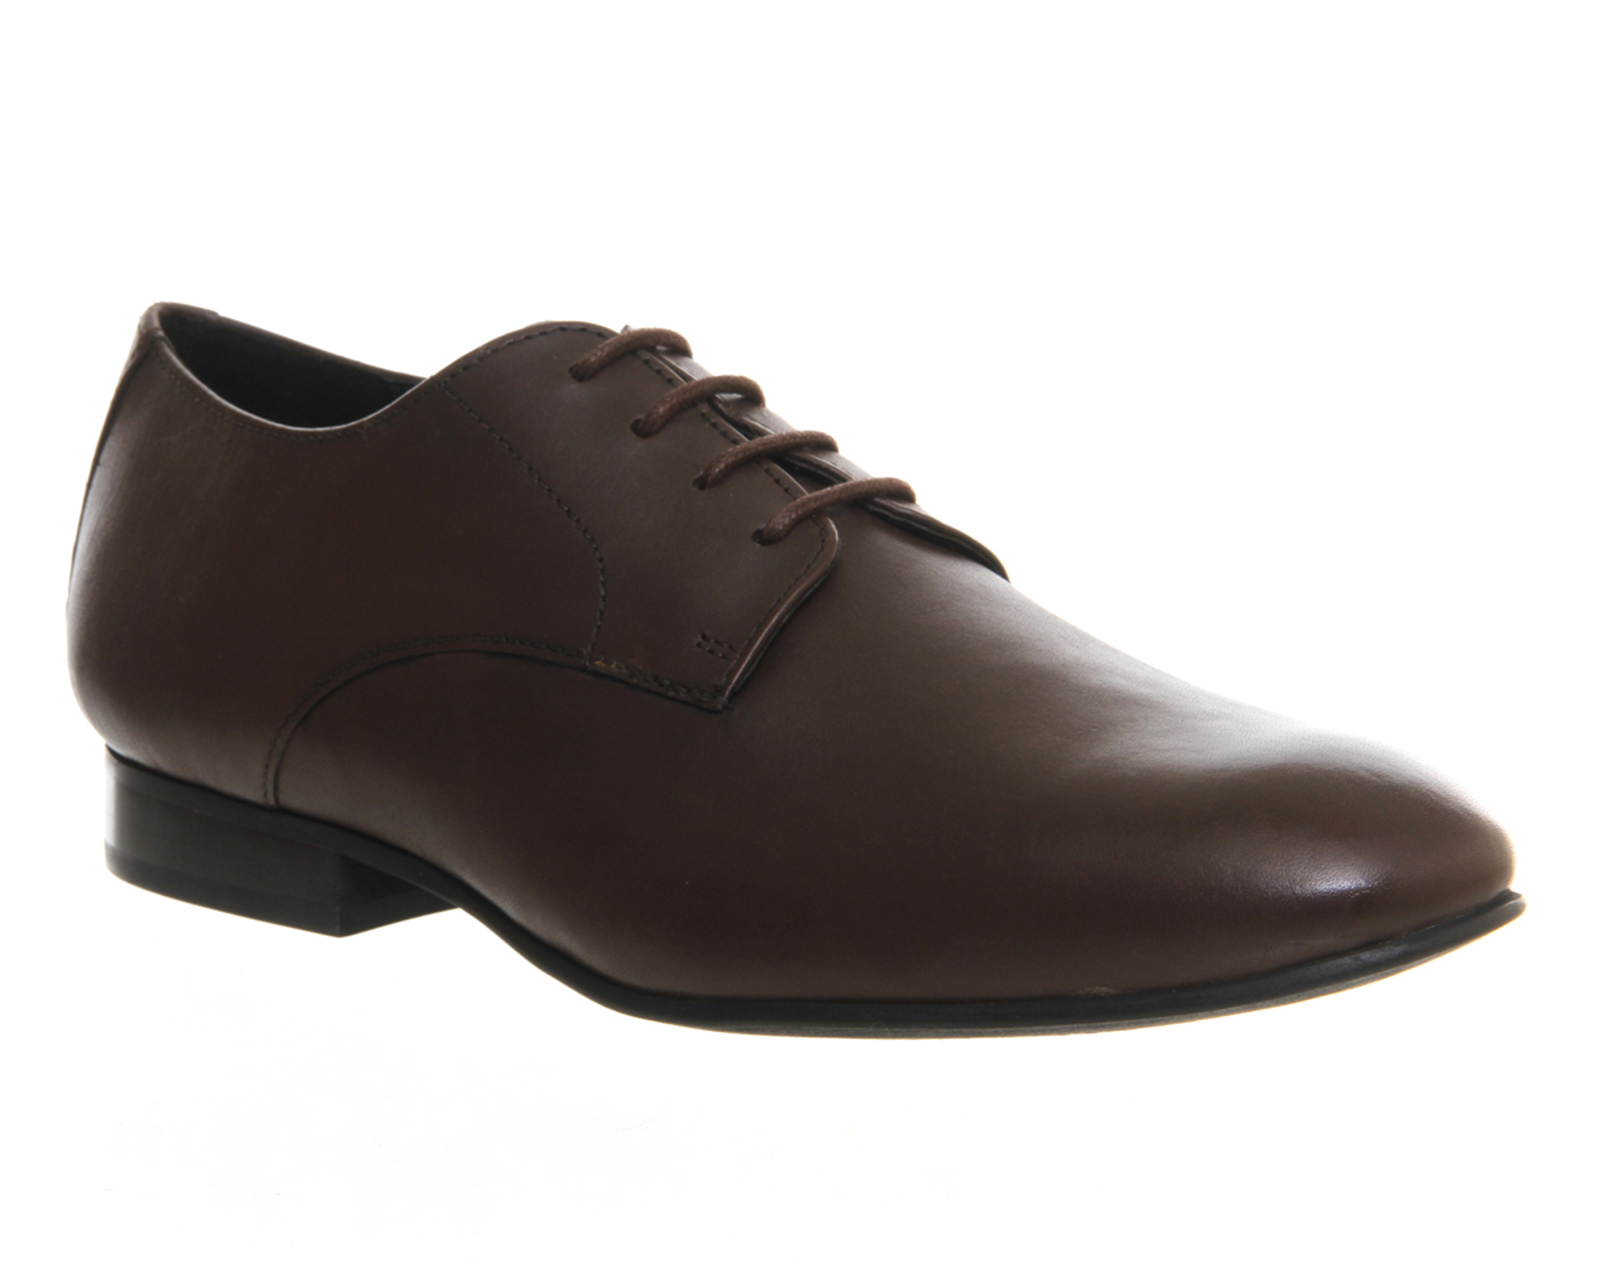 OFFICEBrody Gibson Lace UpBrown Leather